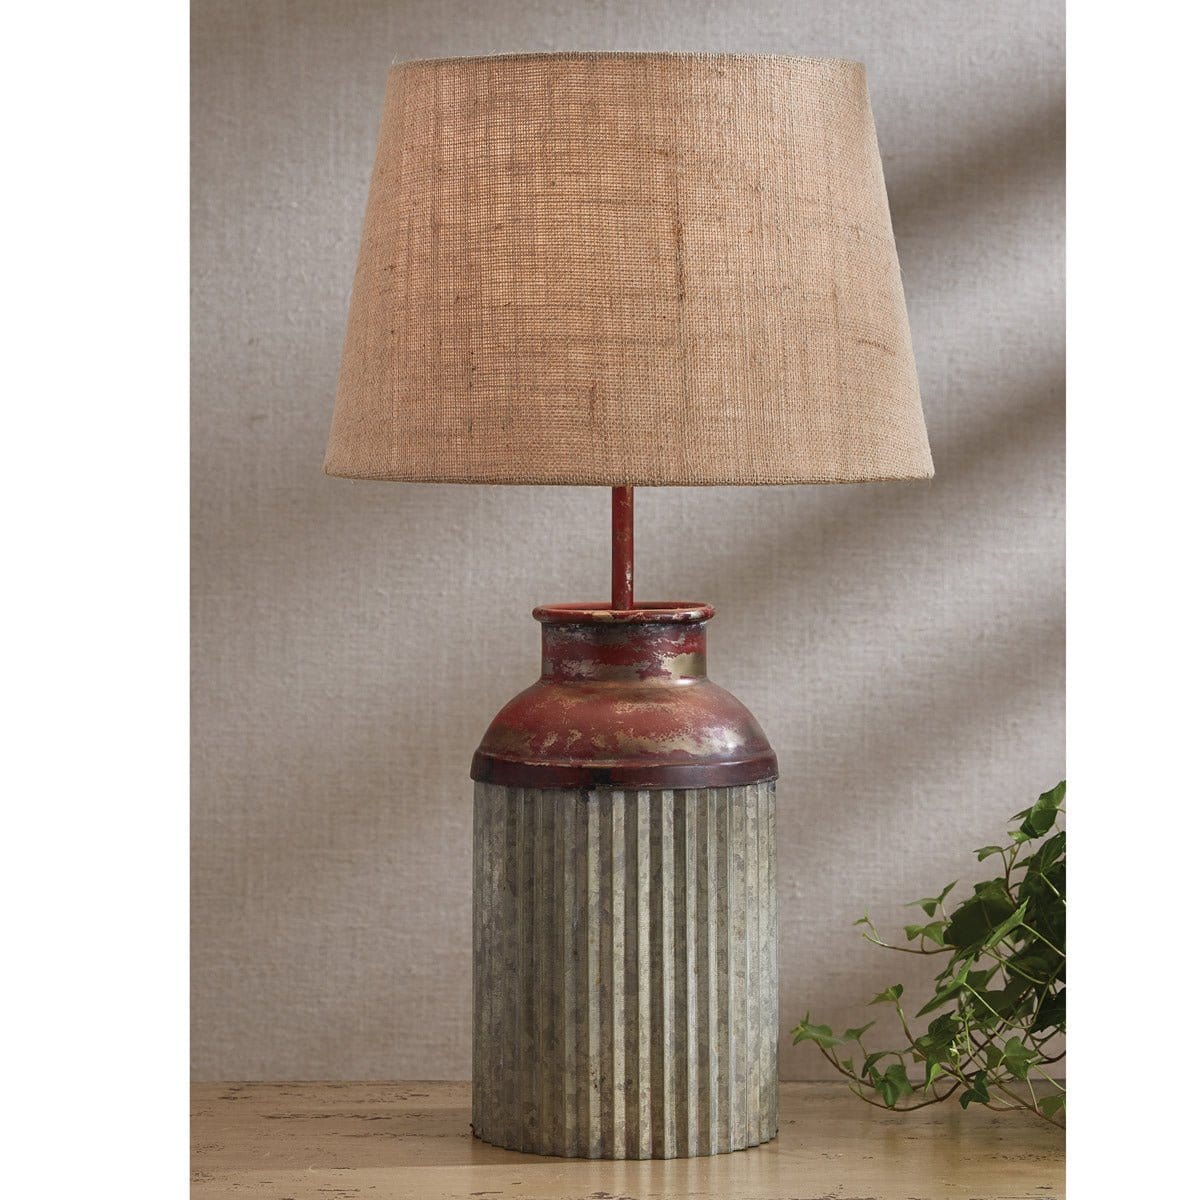 Galvanized Metal Crimped Canister Table Lamp With Shade-Park Designs-The Village Merchant